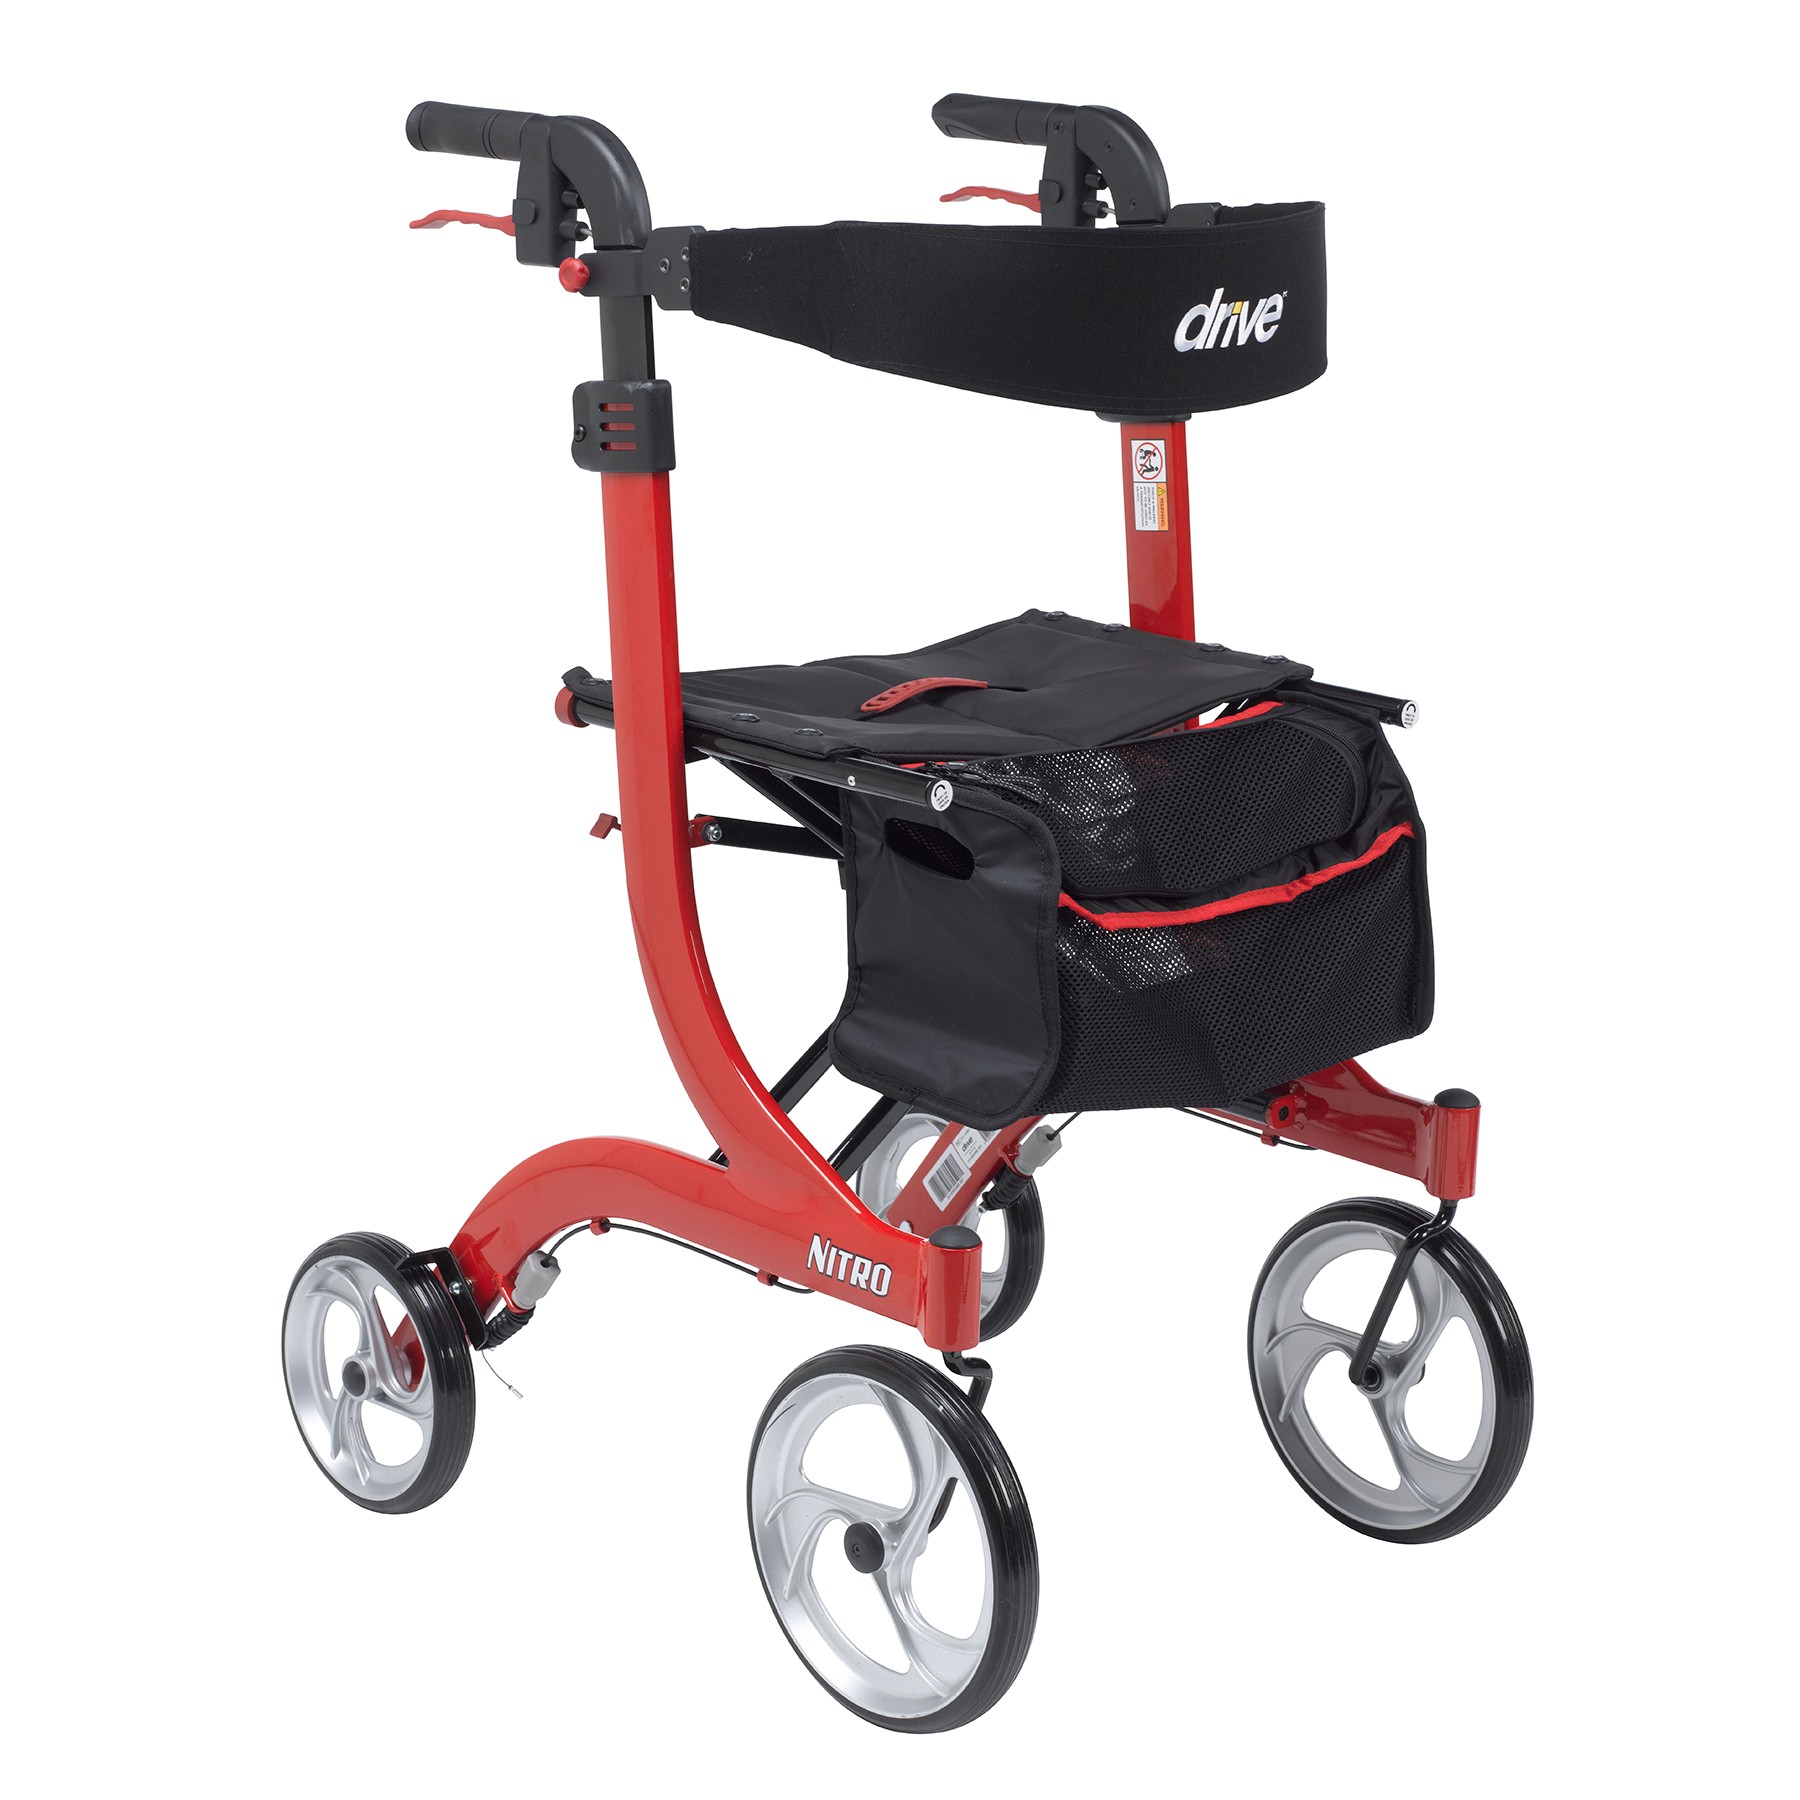 Nitro Aluminum Rollator, Tall Height, 10" Casters - On The Mend Medical Supplies & Equipment